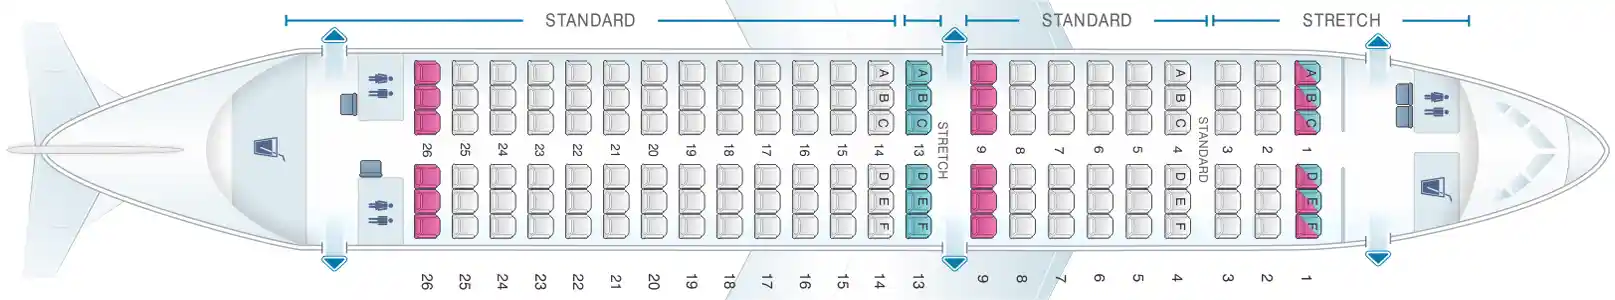 frontier-airlines-seat-map